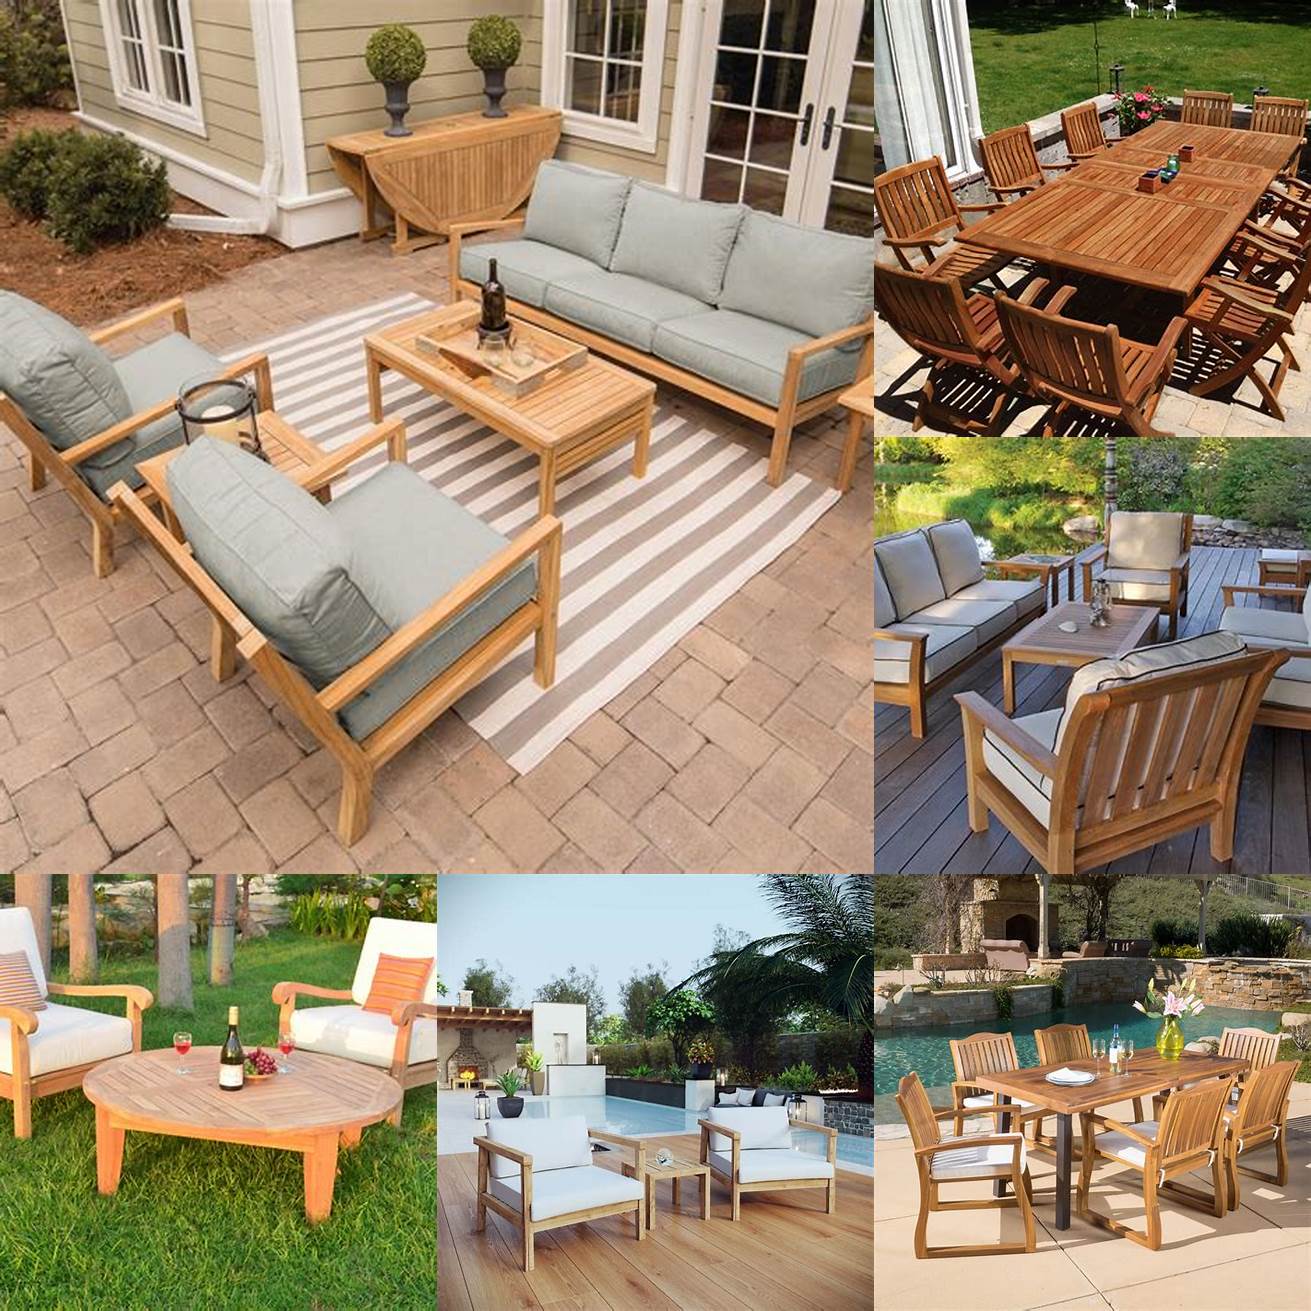 A photo of the teak patio furniture set in use